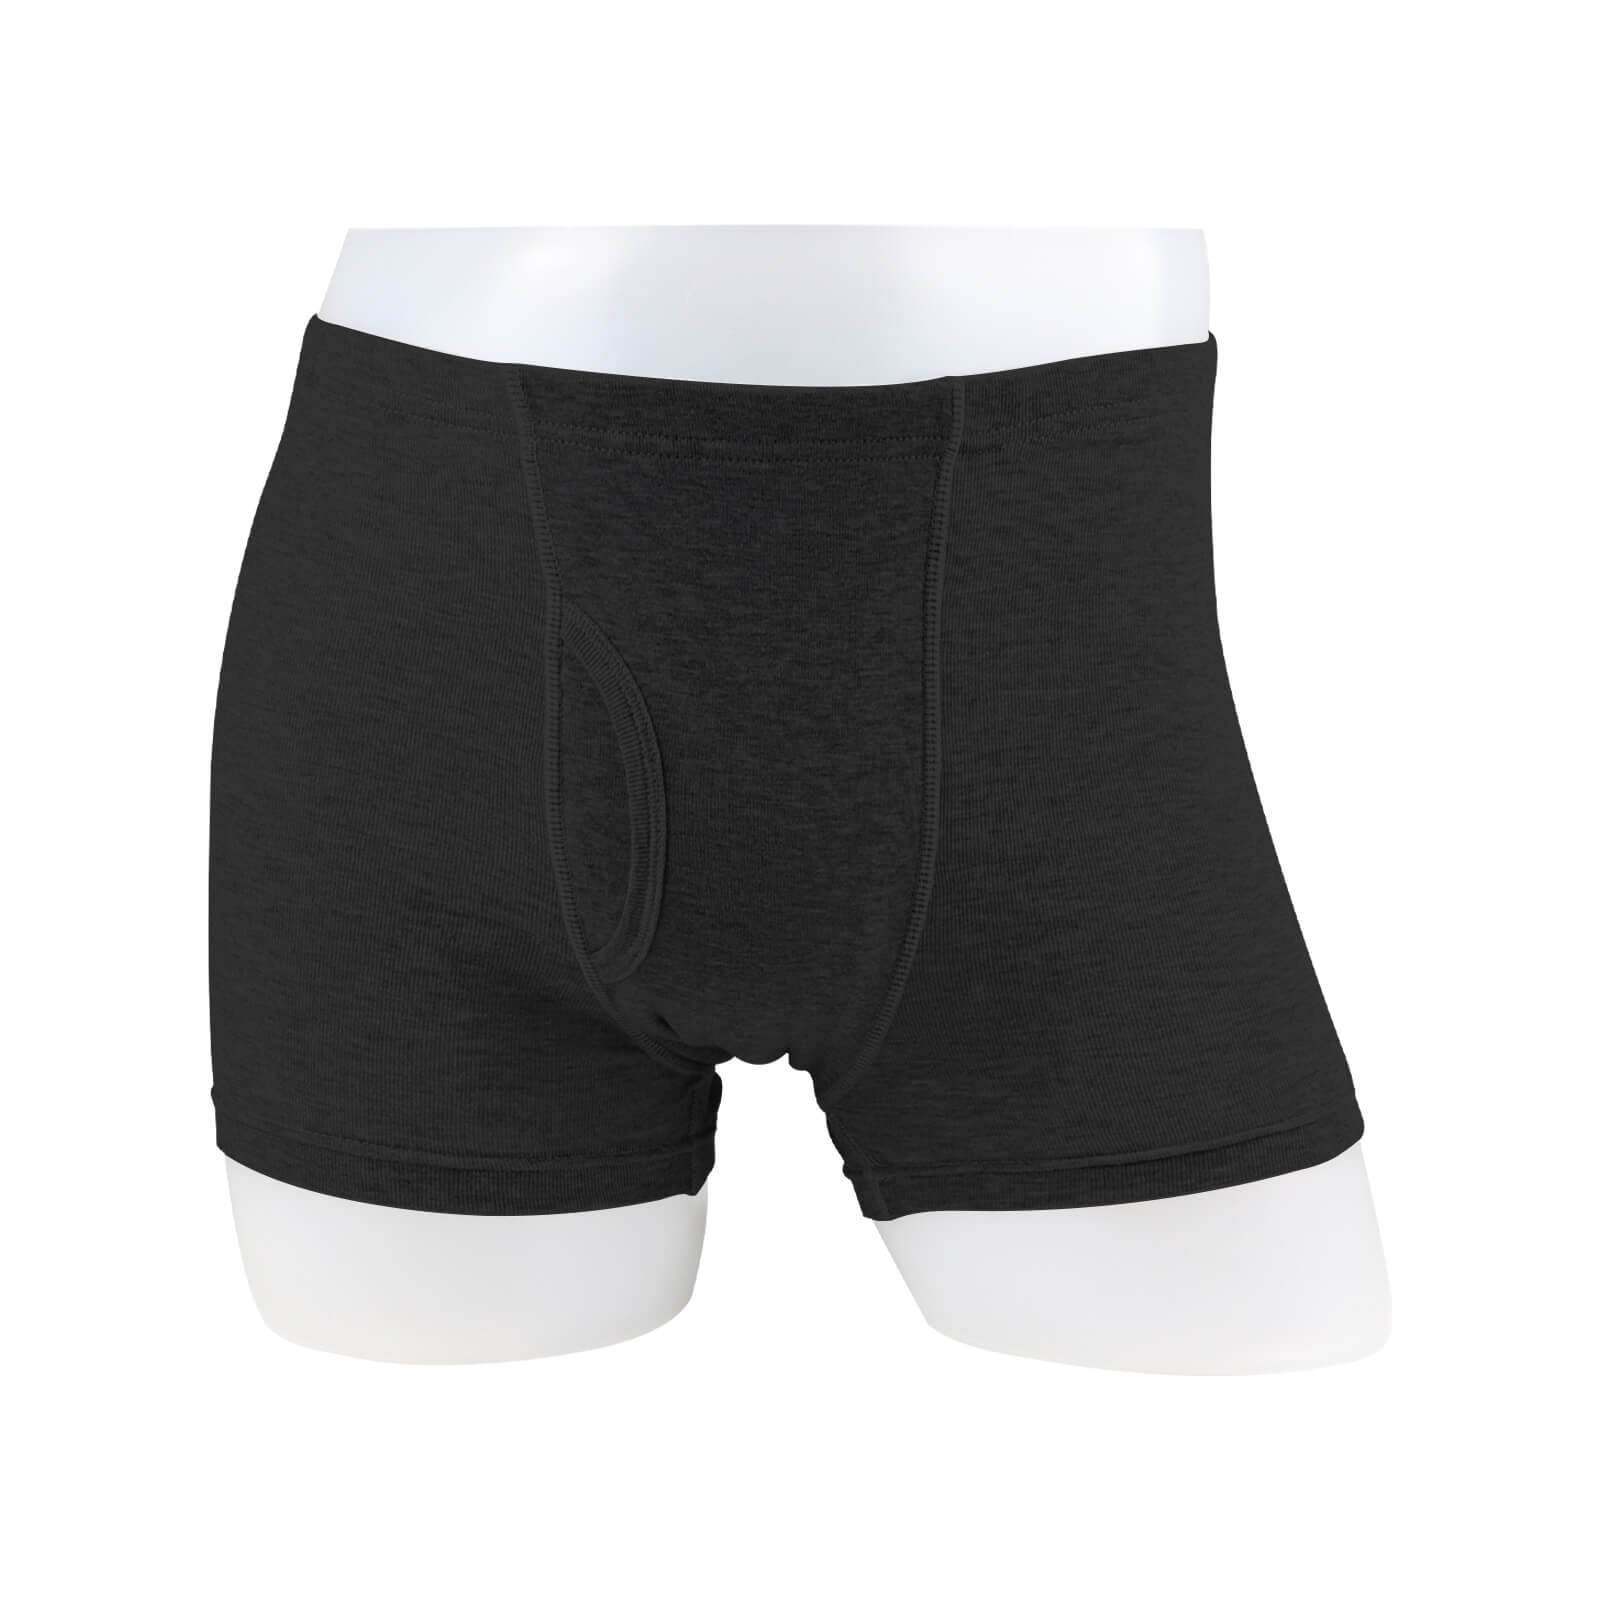 Washable Underwear for Heavy Incontinence Super Absorbency Overnight -M67 Black